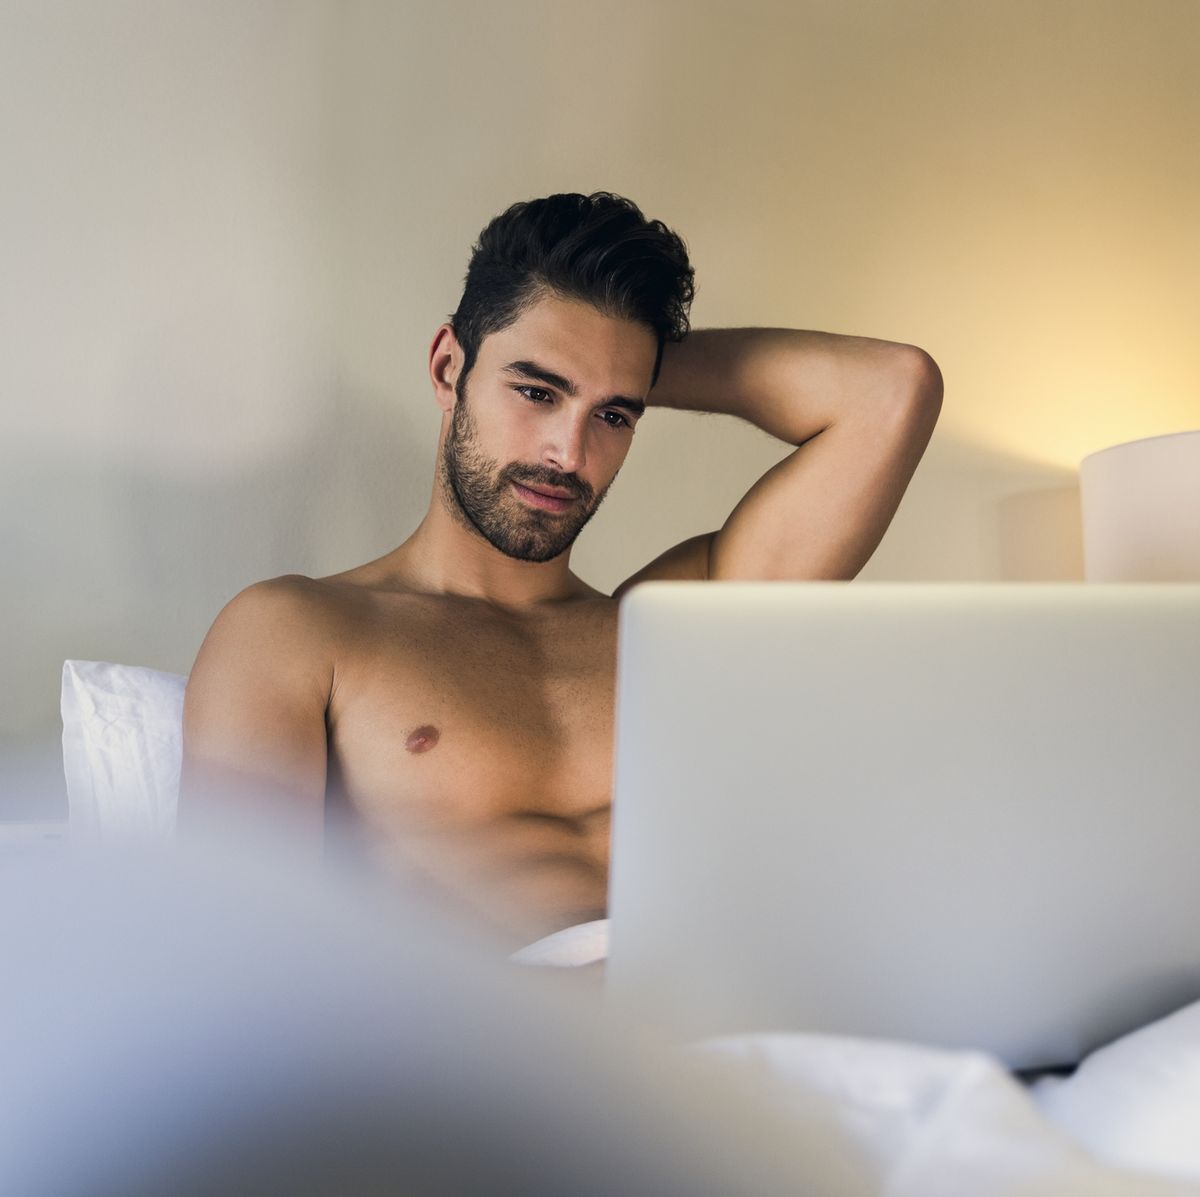 Browser Sexy Video - How to Browse Porn Sites Safely Without Getting Hacked